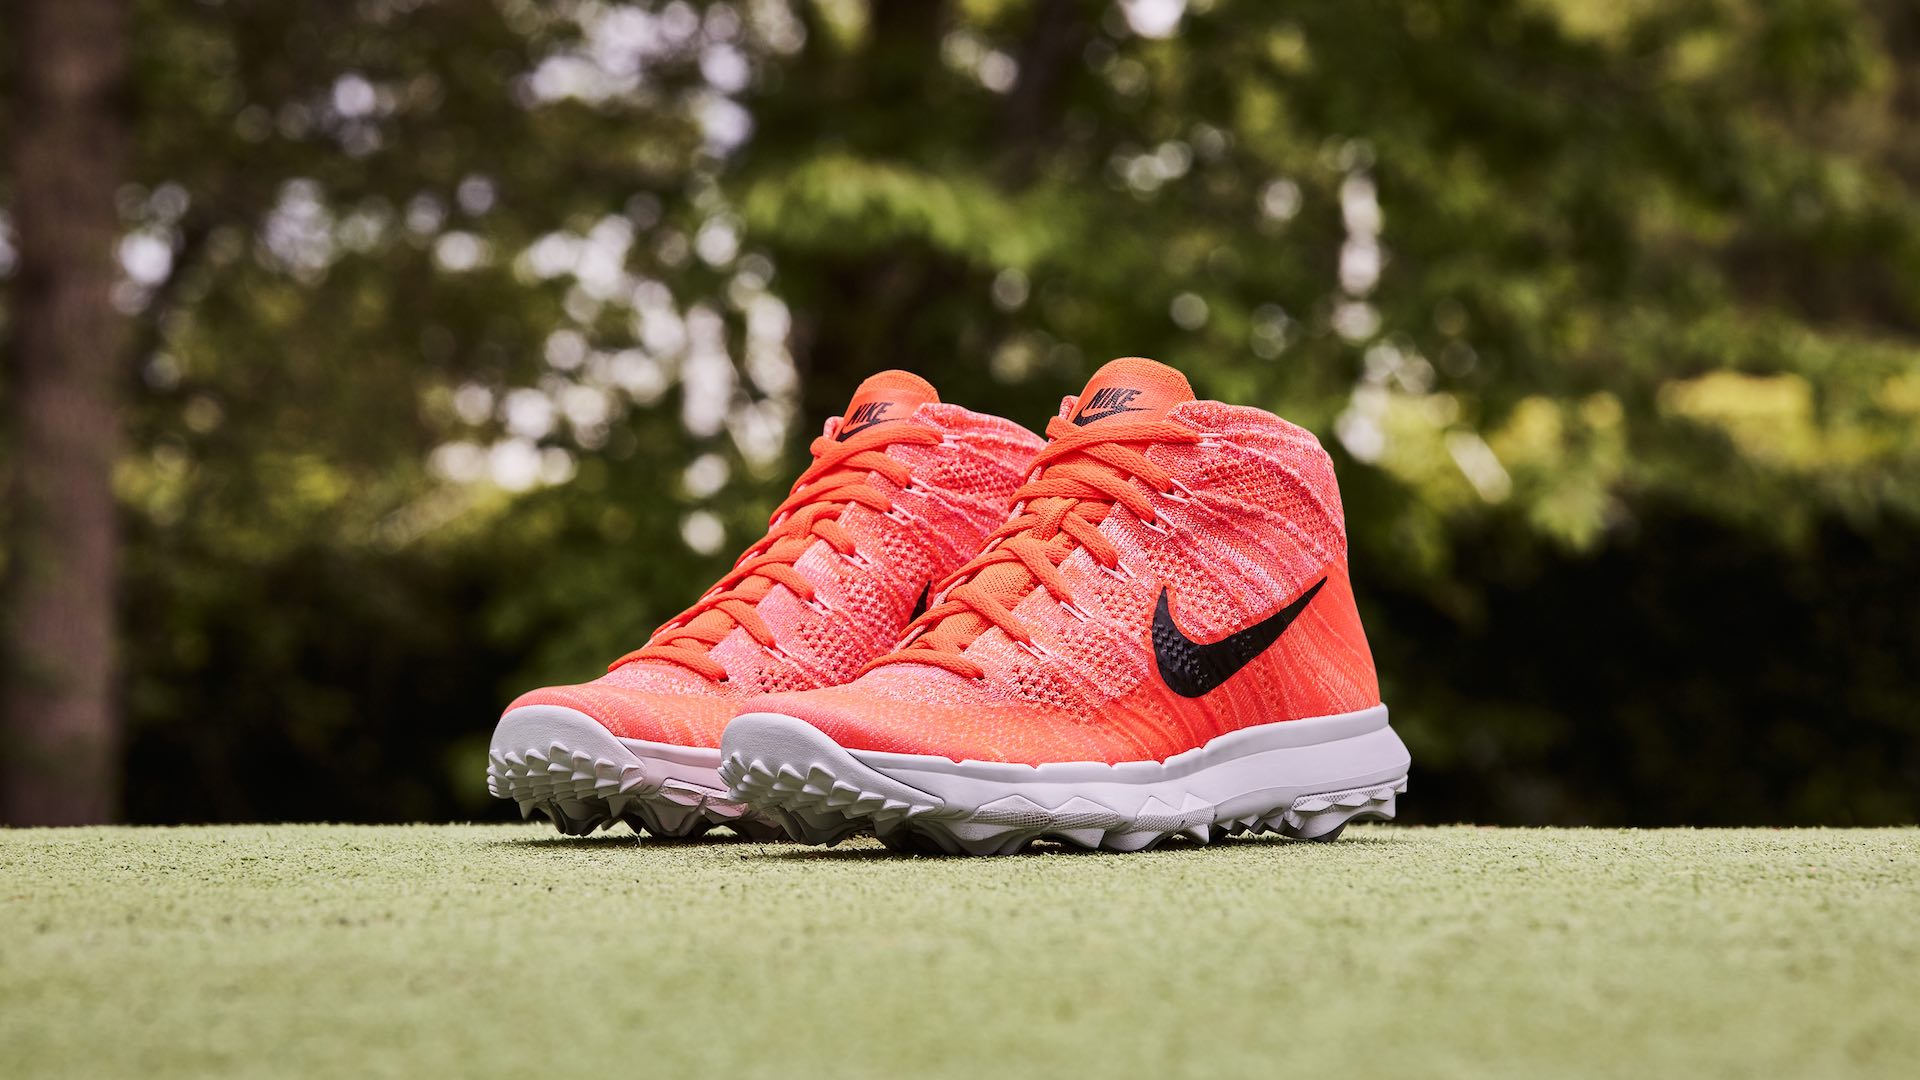 New Colours for Nike Flyknit Chukka 